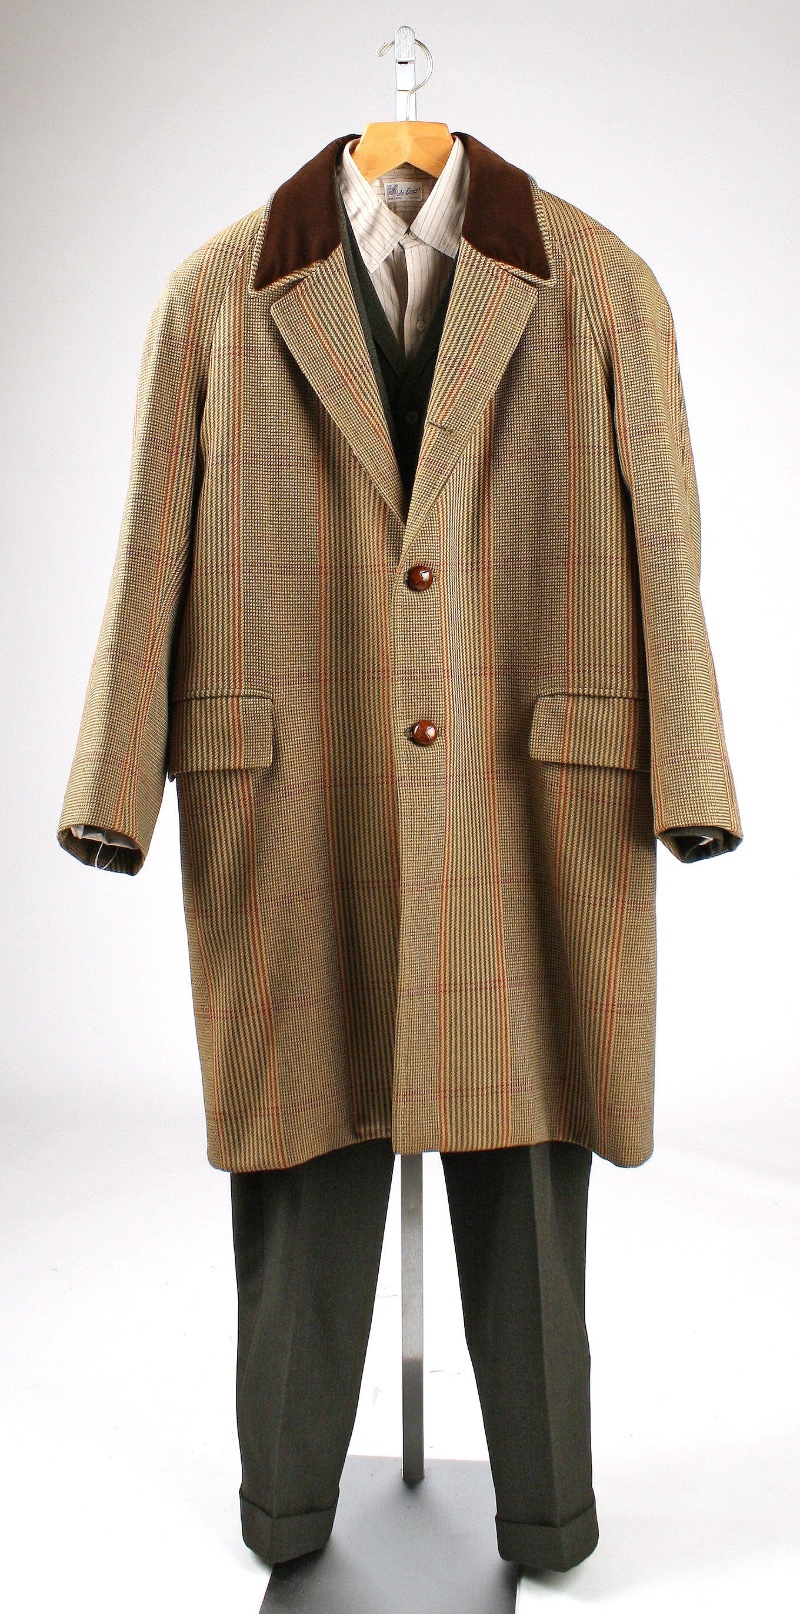 A 1950s men's outfit, consisting of wool, silk, cotton, and leather.